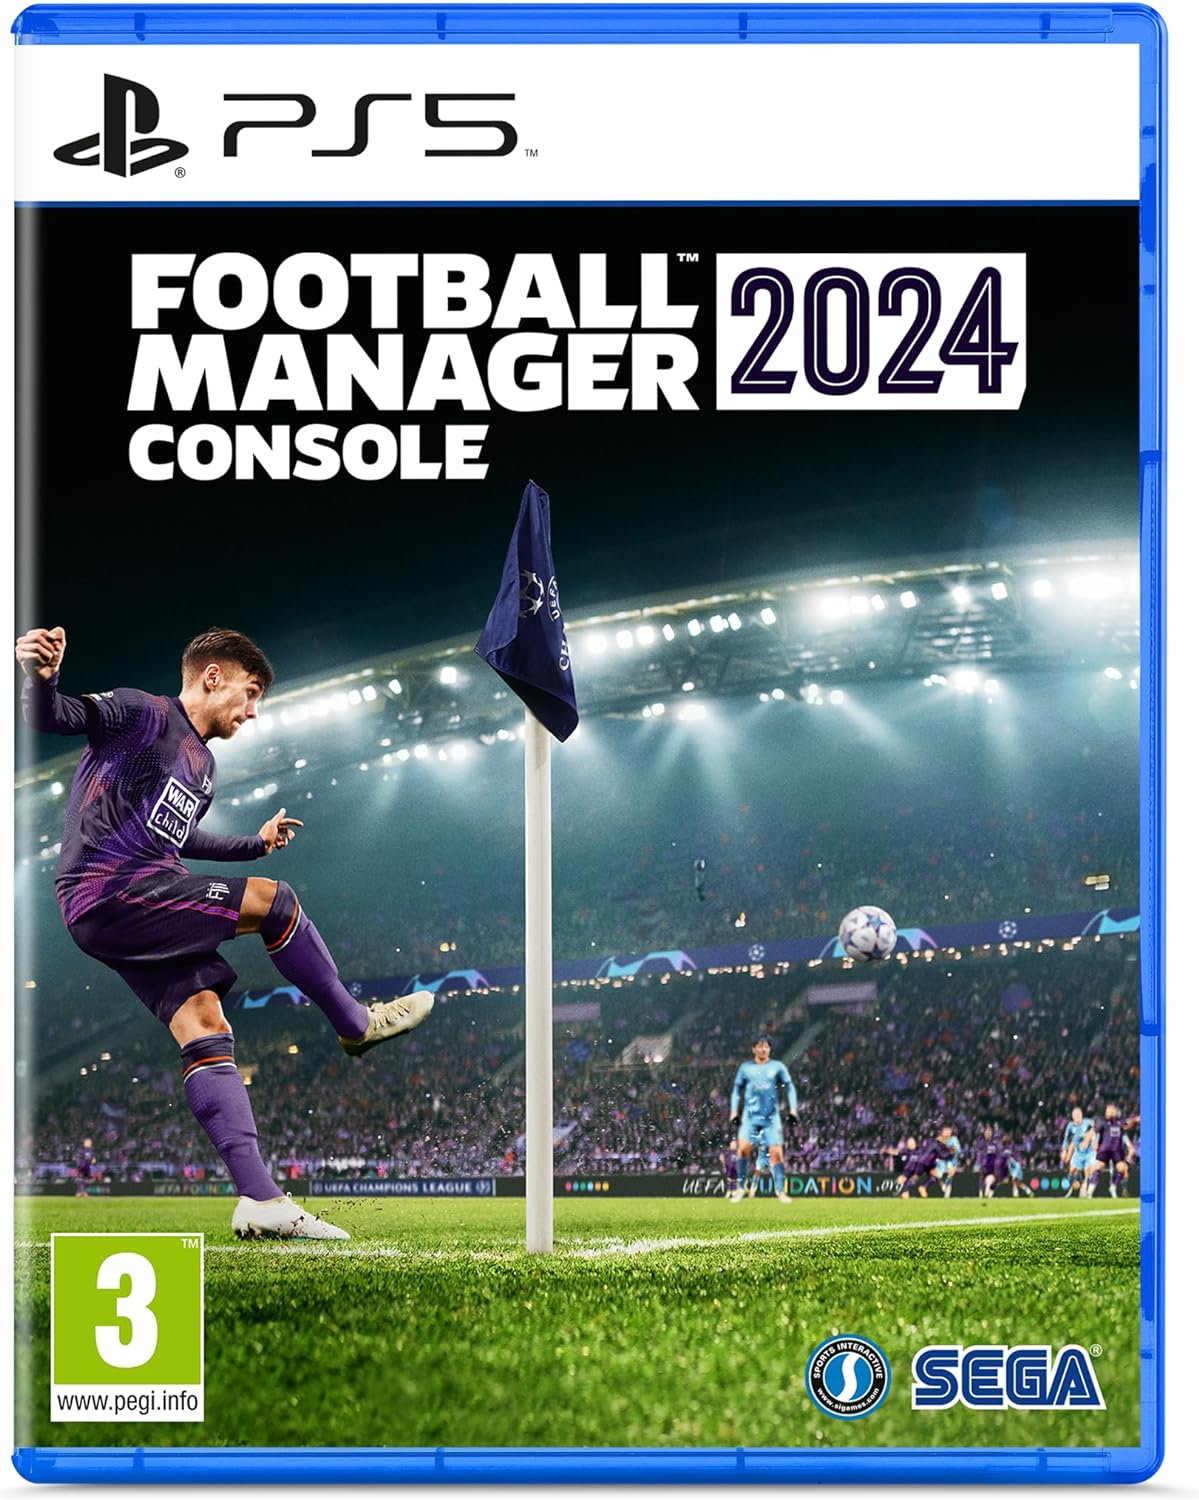 Buy Football Manager 2024 Console PSN Download Key (Playstation) UNITED